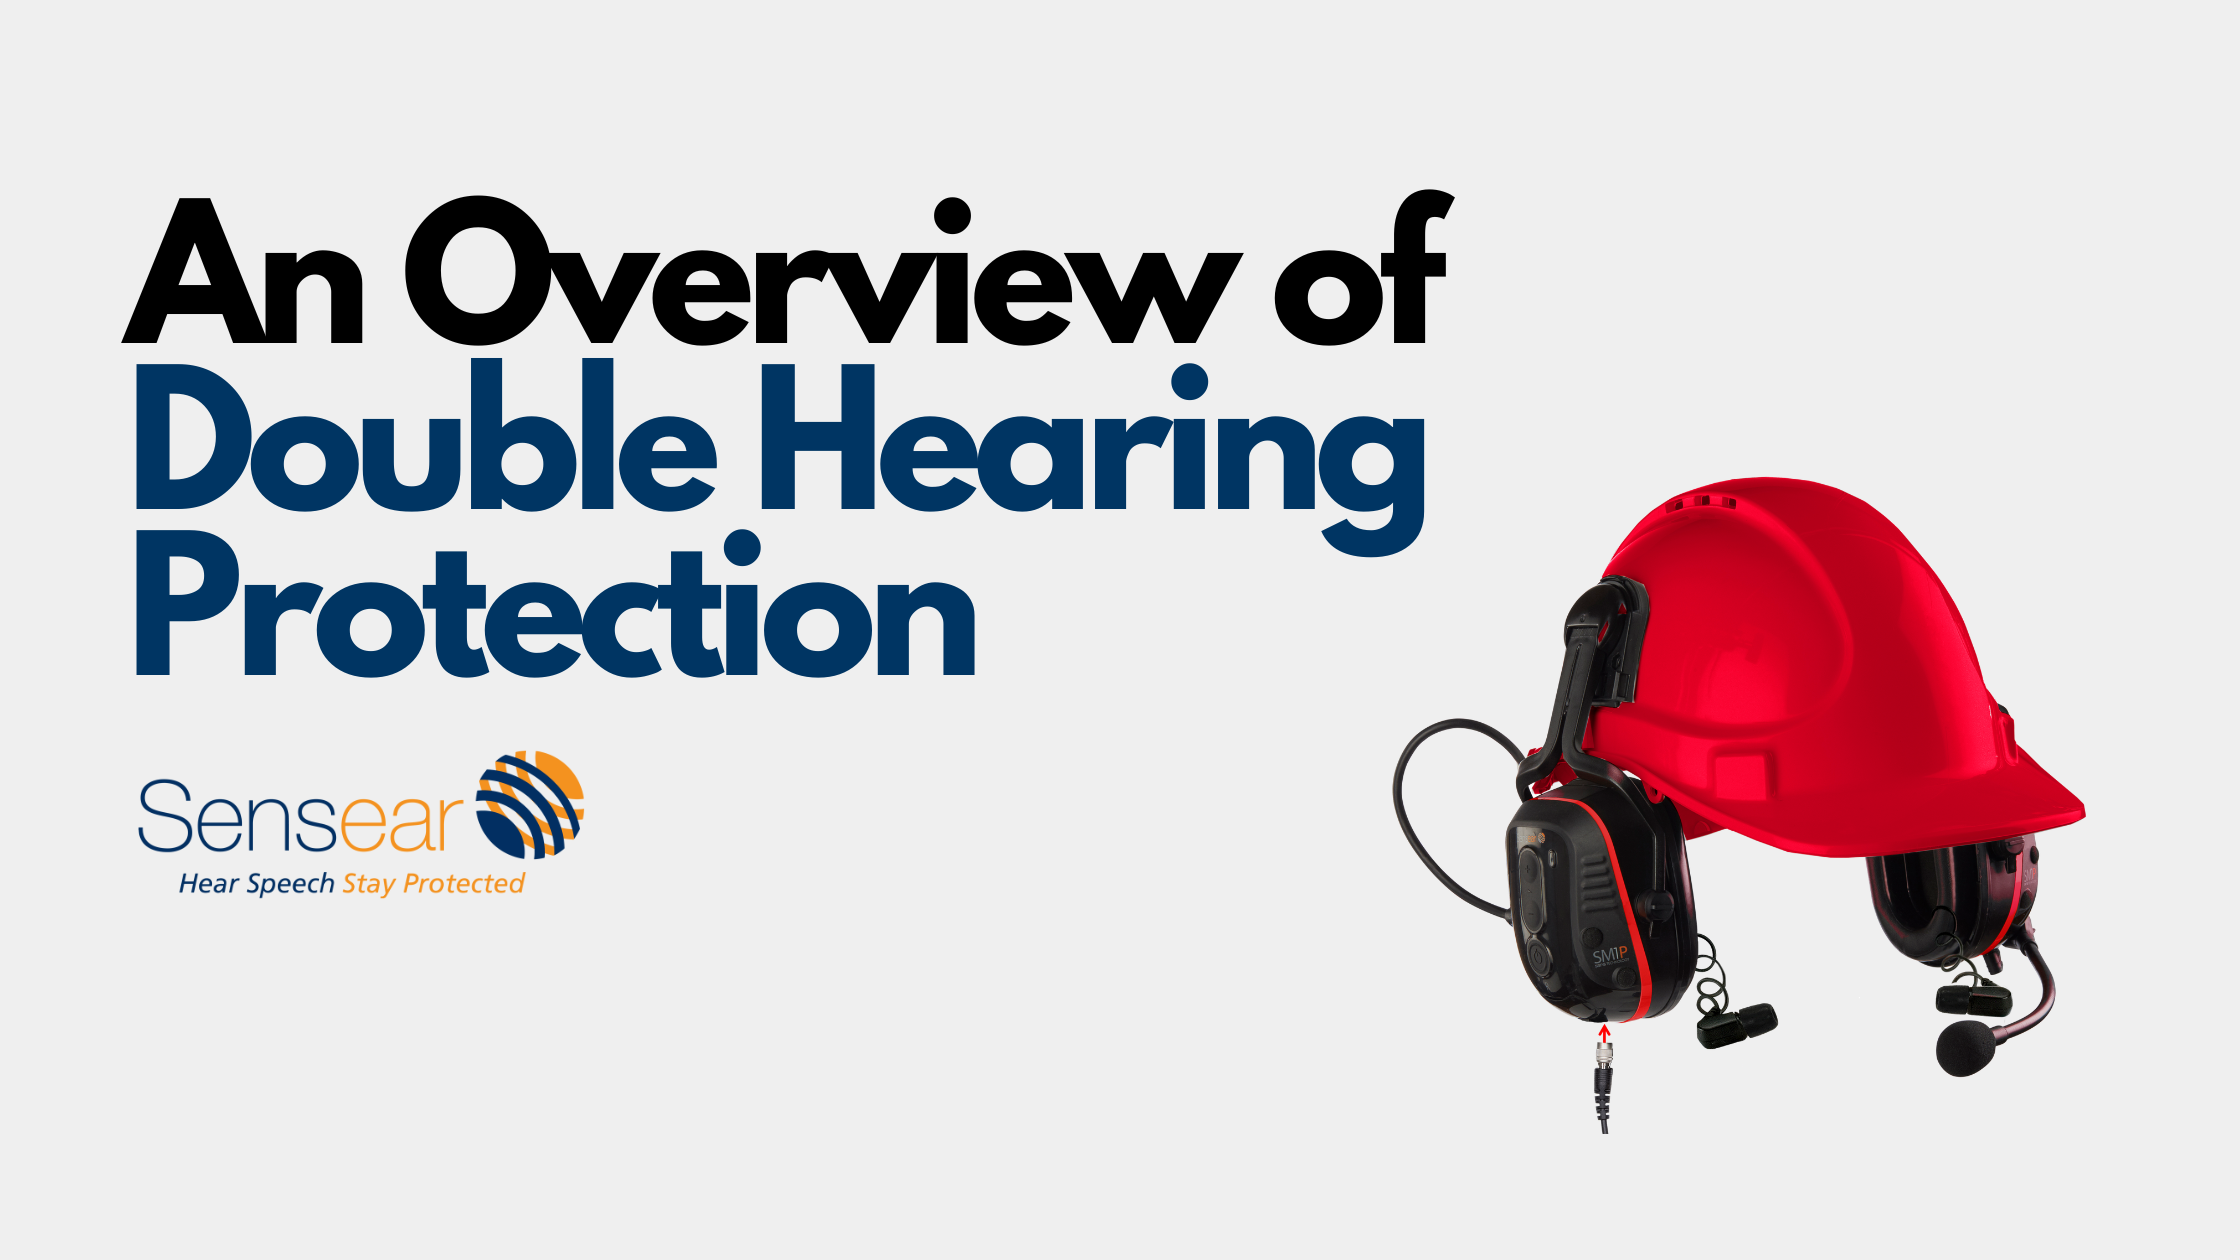 An Overview of Double Hearing Protection